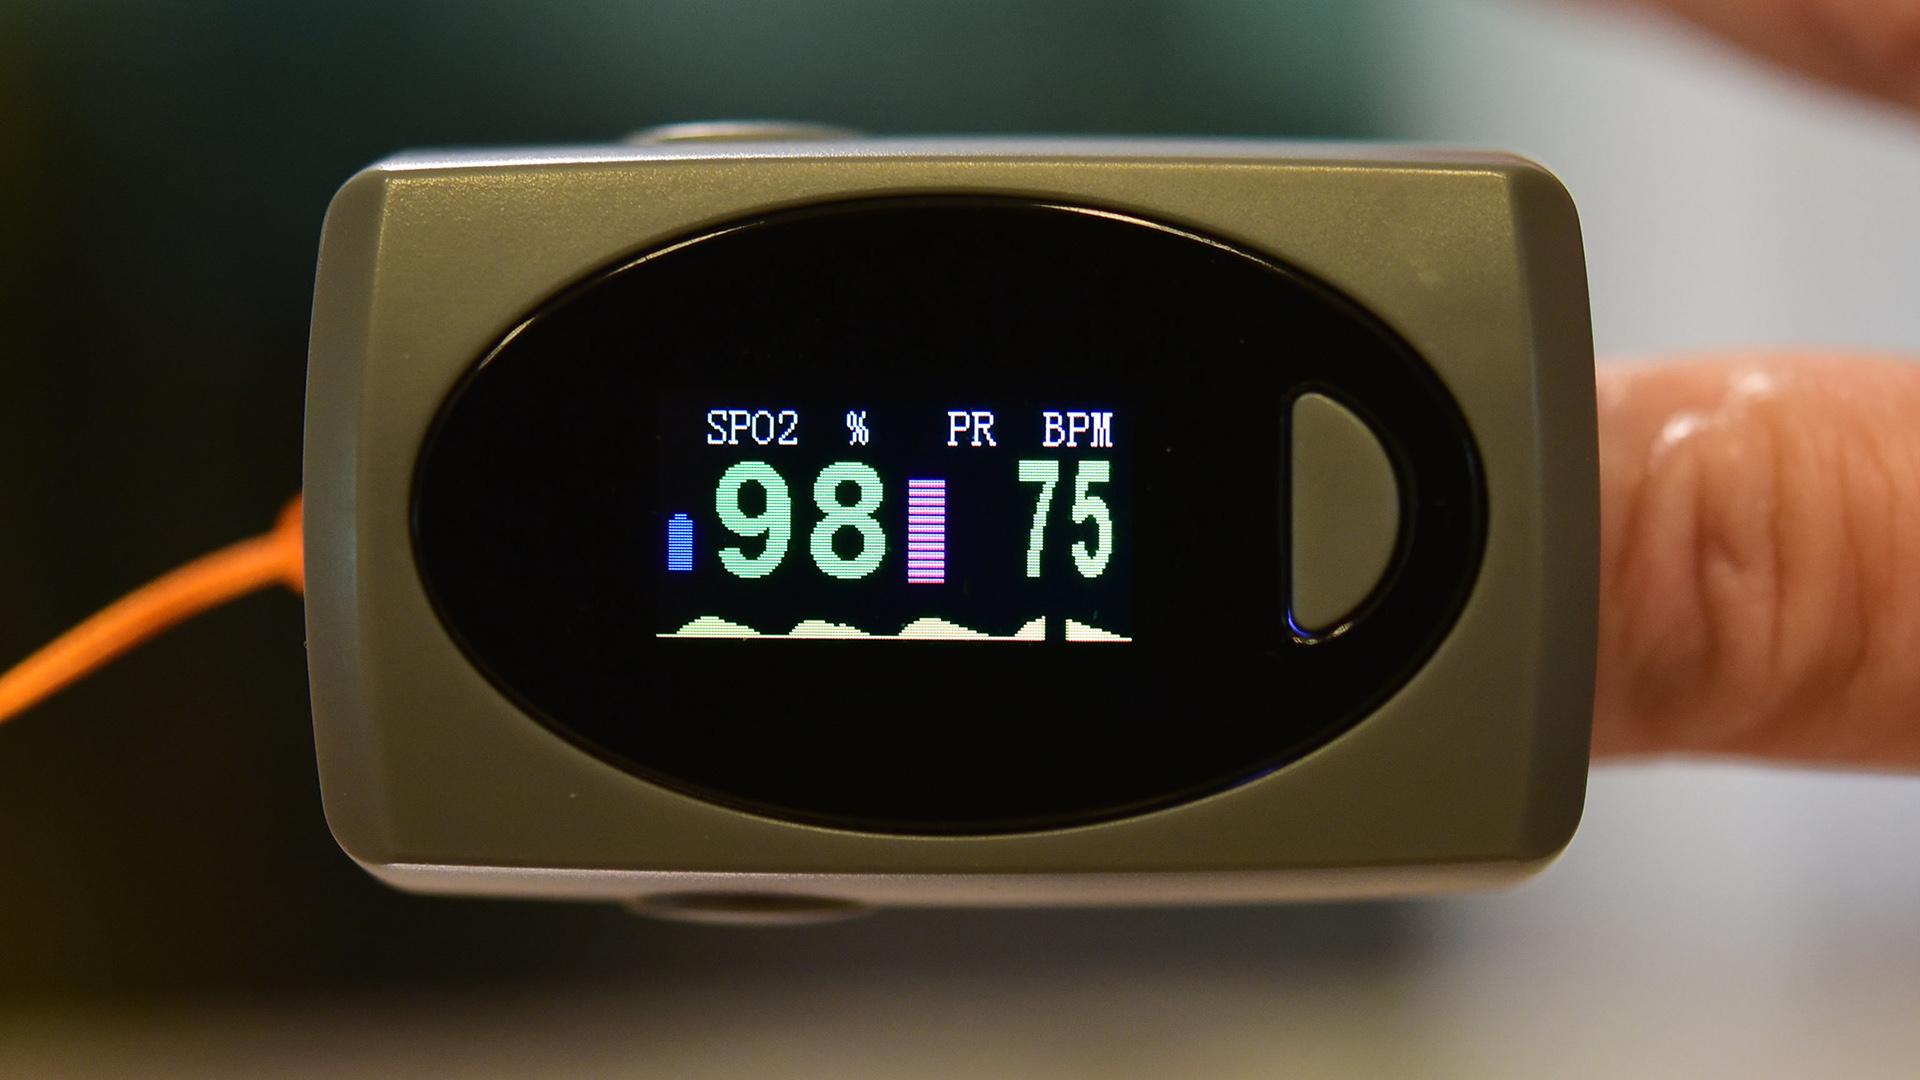 Included in the COVID-19 care kit given to patients is a pulse oximeter, which measures blood oxygen levels. (slgckgc / Flickr)